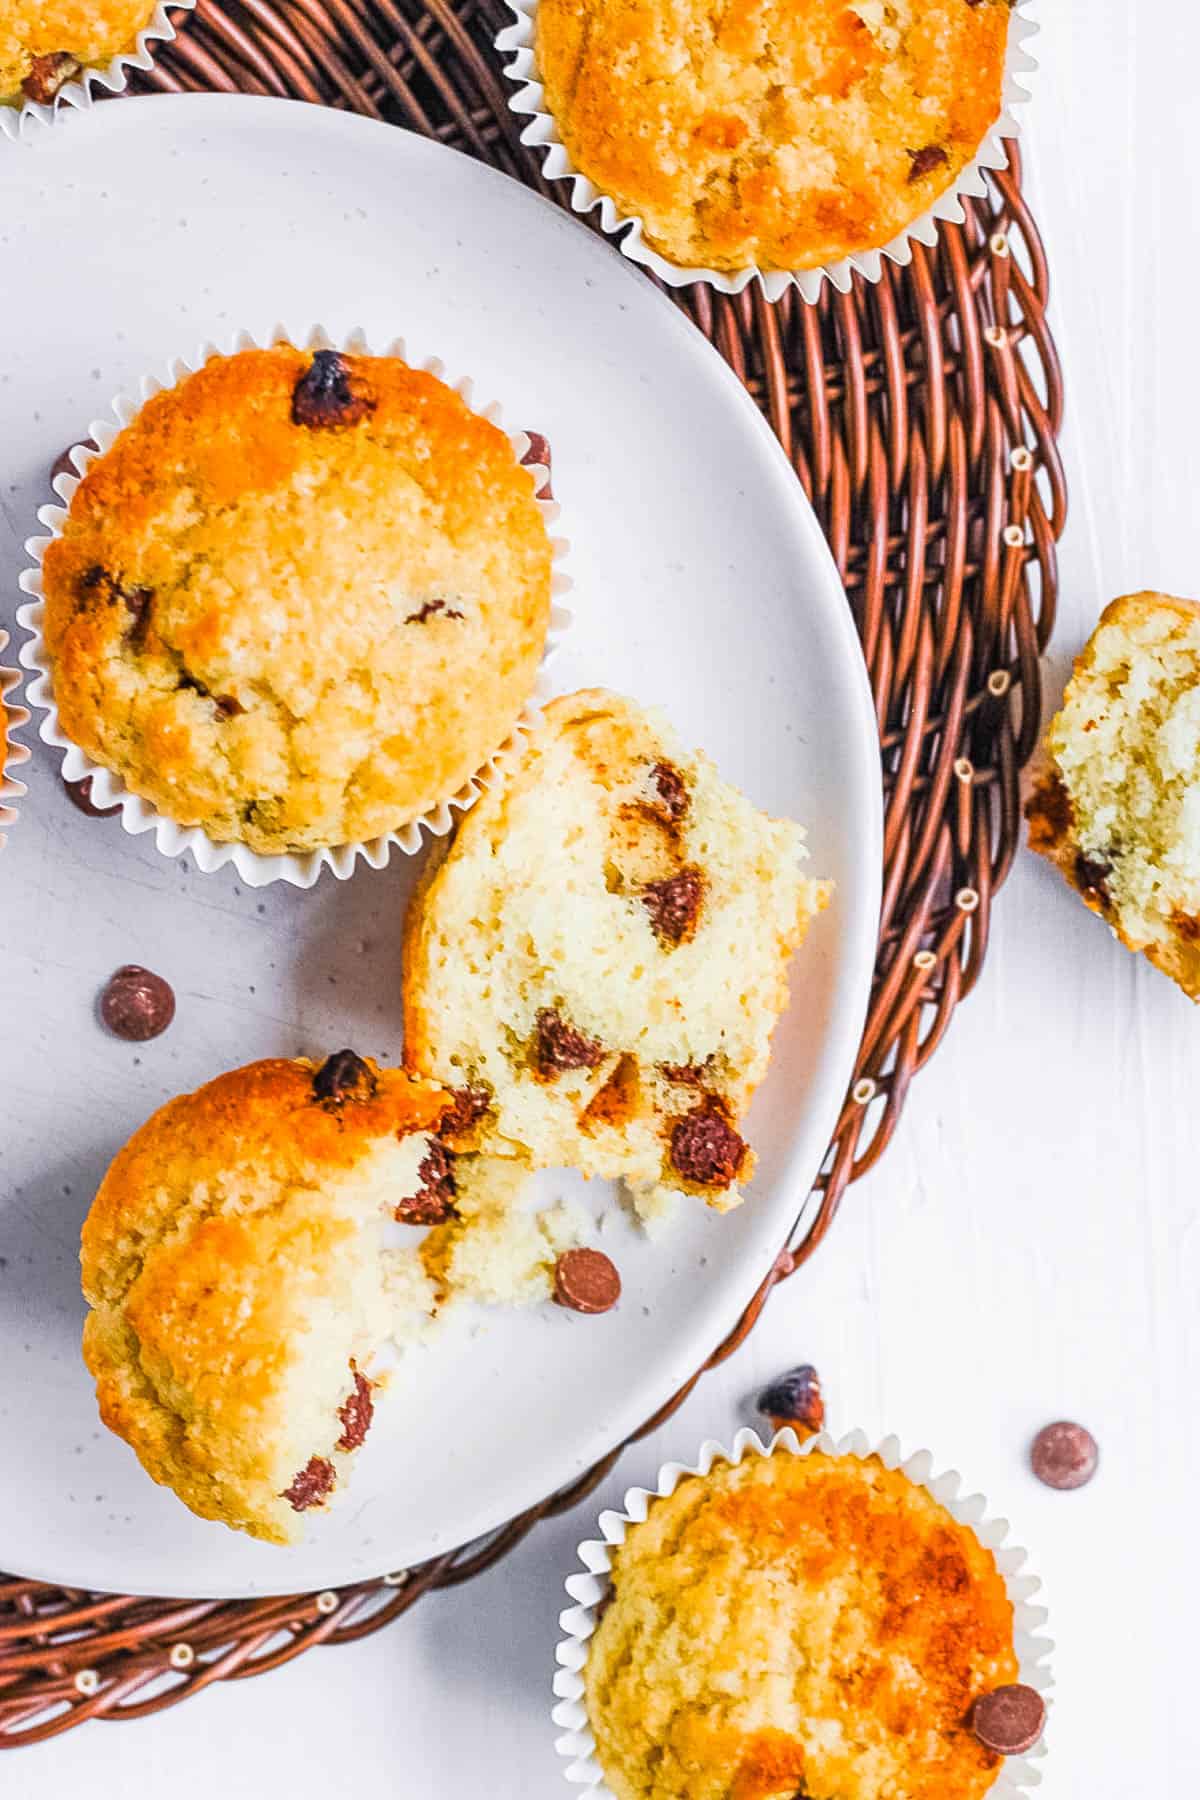 Vegan chocolate chip muffins on a white plate.